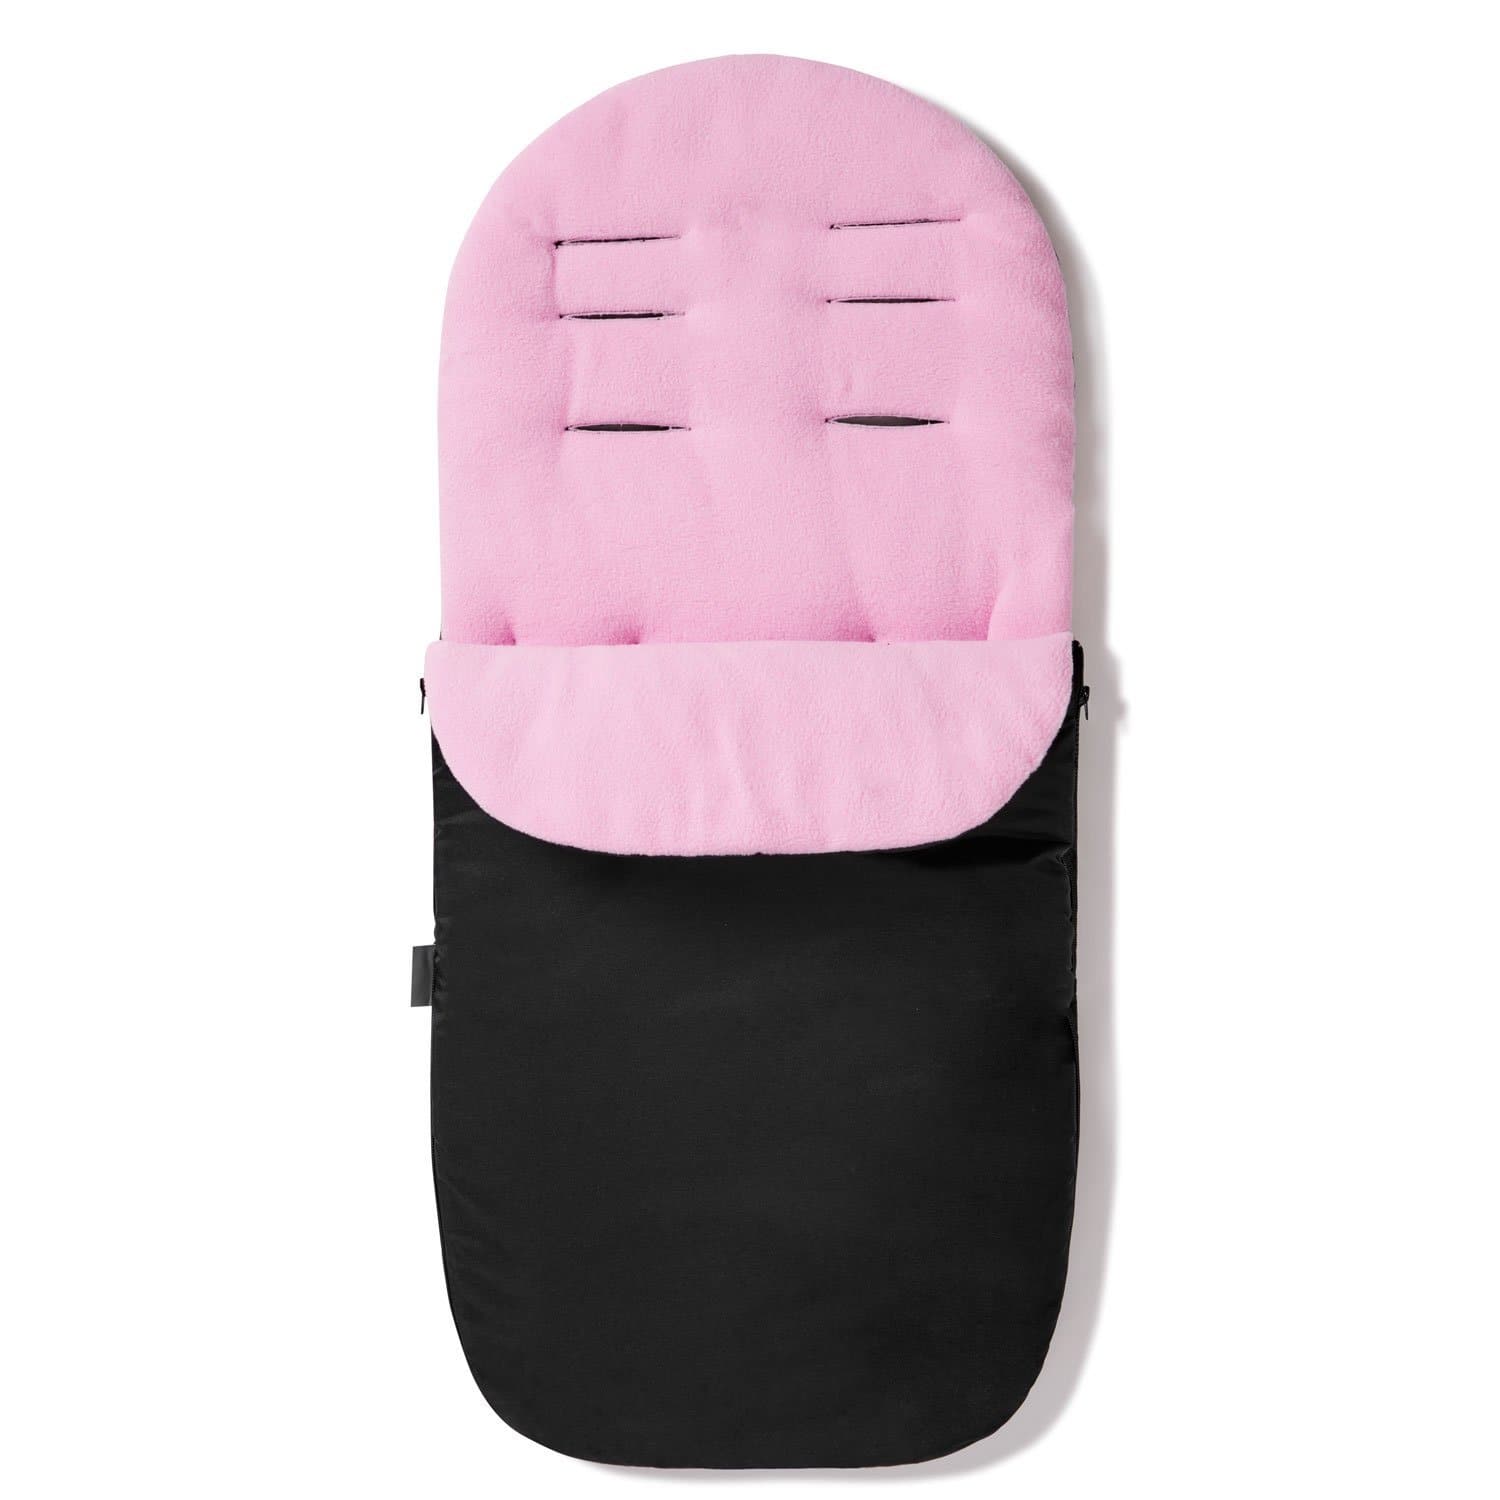 Footmuff / Cosy Toes Compatible with Kiddicare.com - Light Pink / Fits All Models | For Your Little One